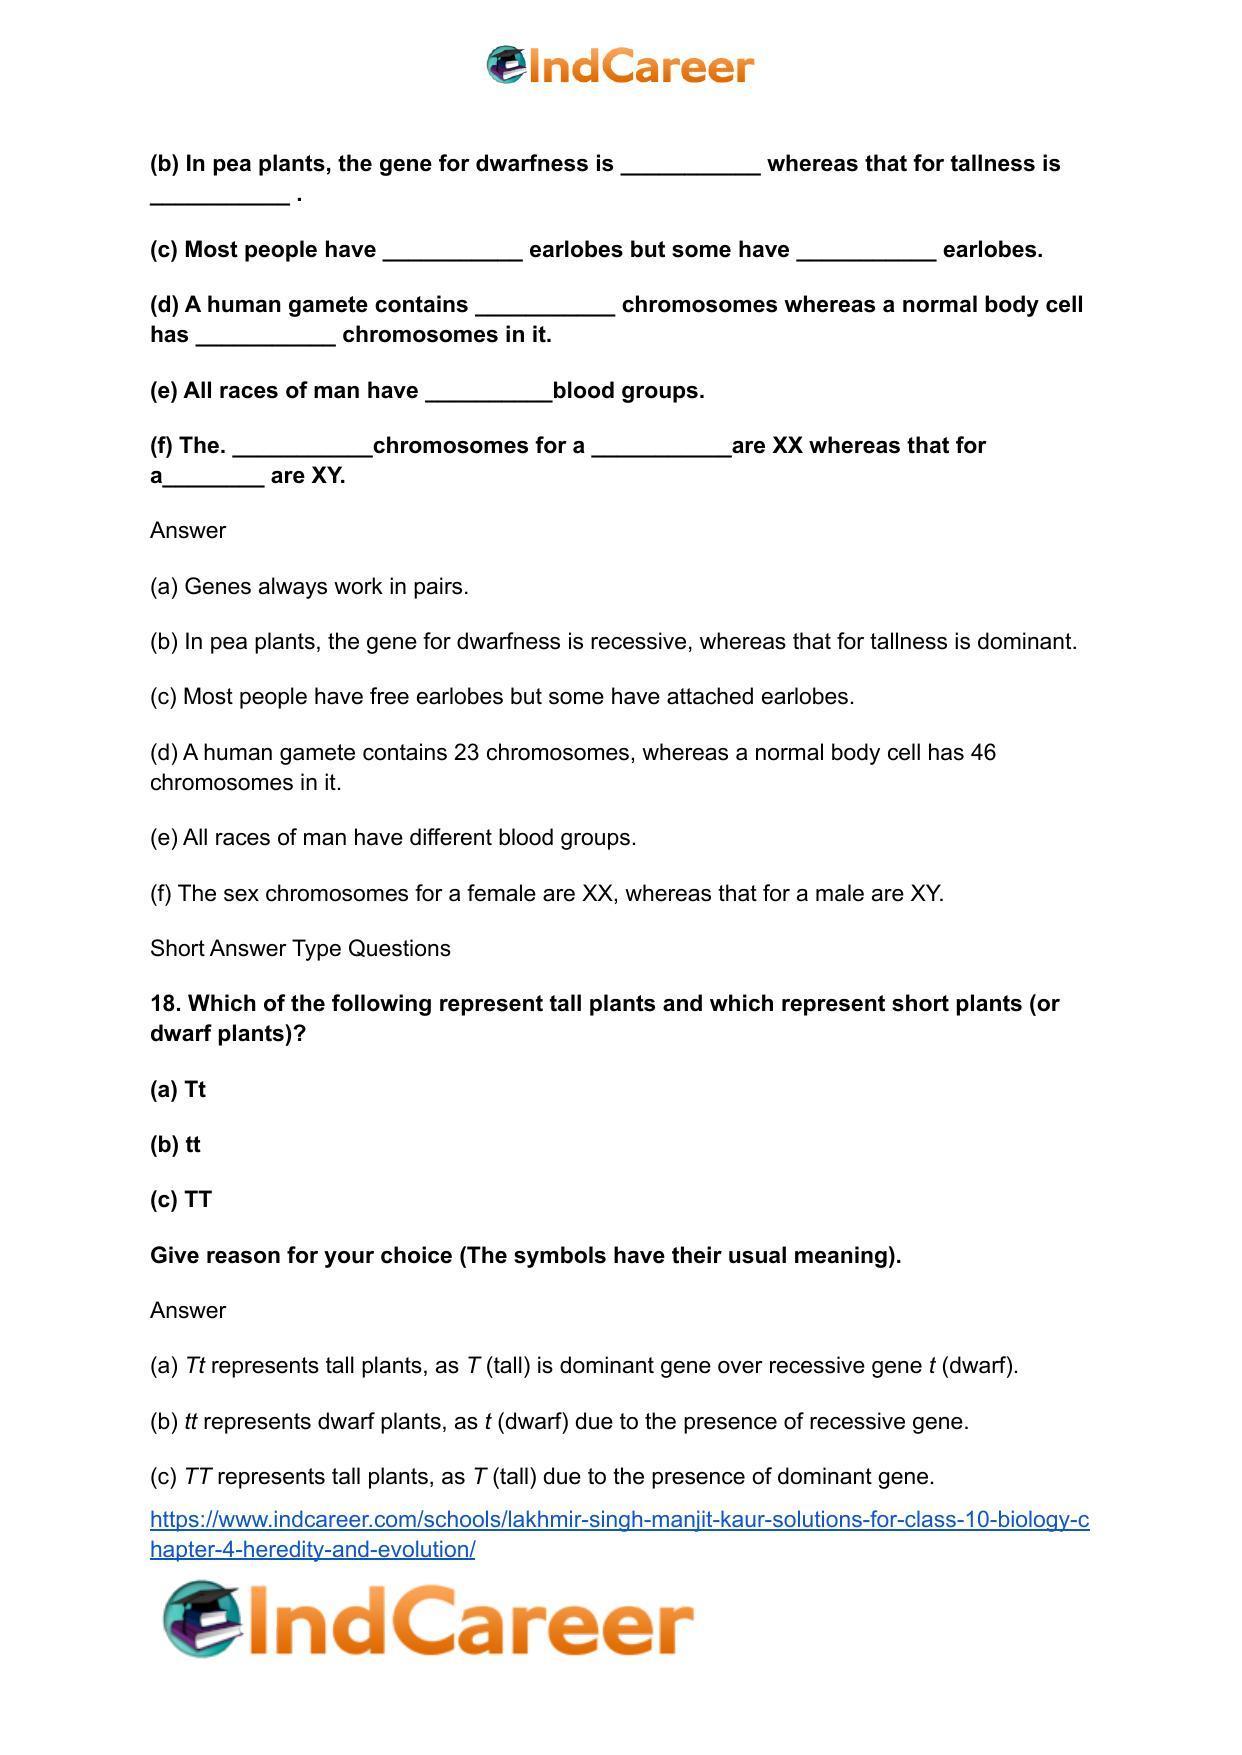 Lakhmir Singh Manjit Kaur  Solutions for Class 10 Biology: Chapter 4- Heredity and Evolution - Page 5